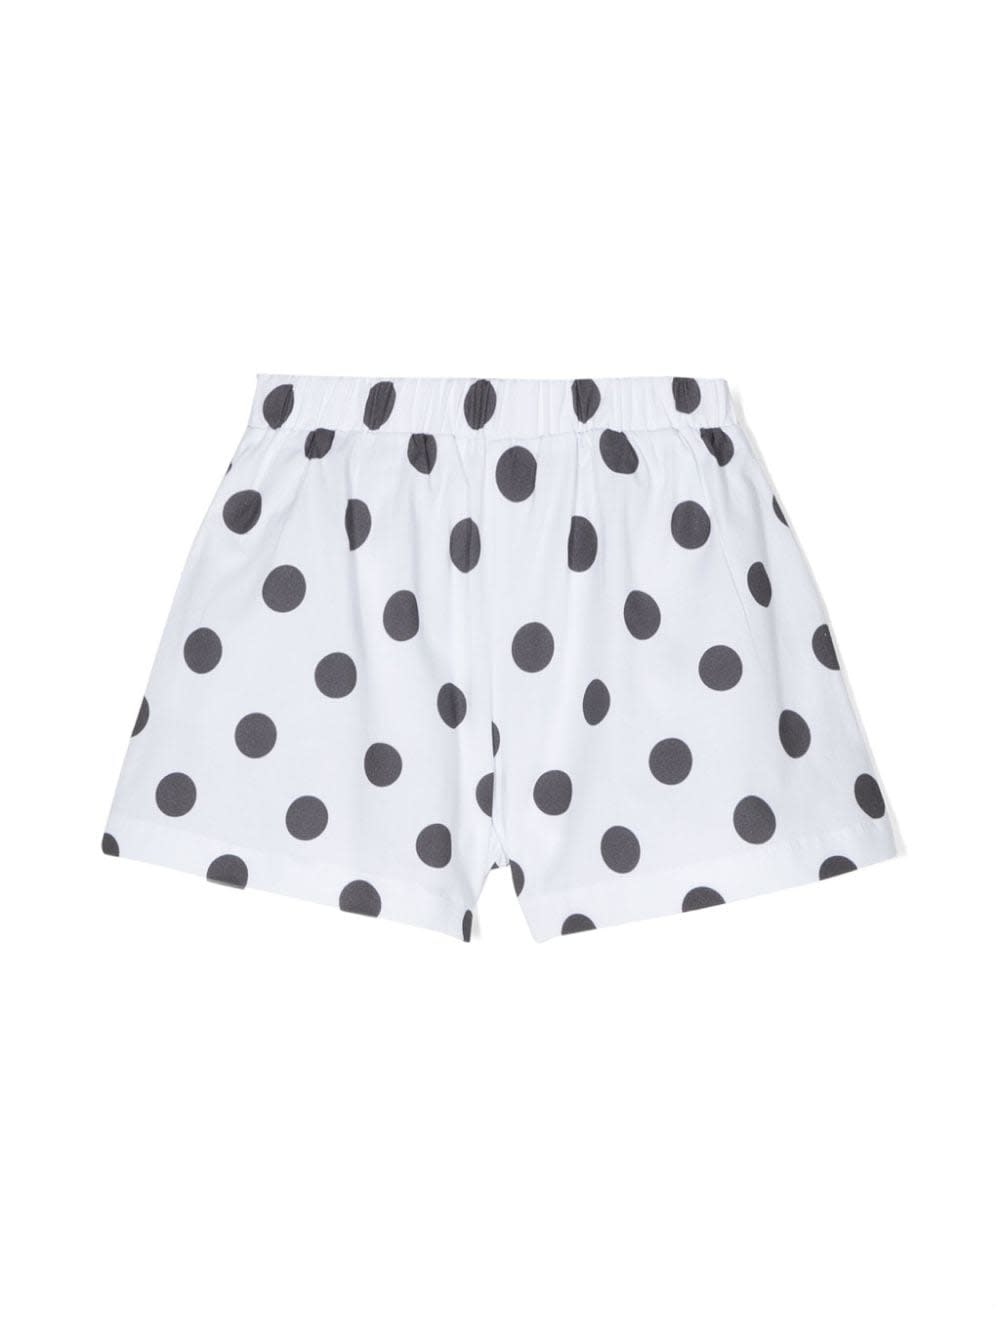 Shop Douuod Shorts A Pois In White